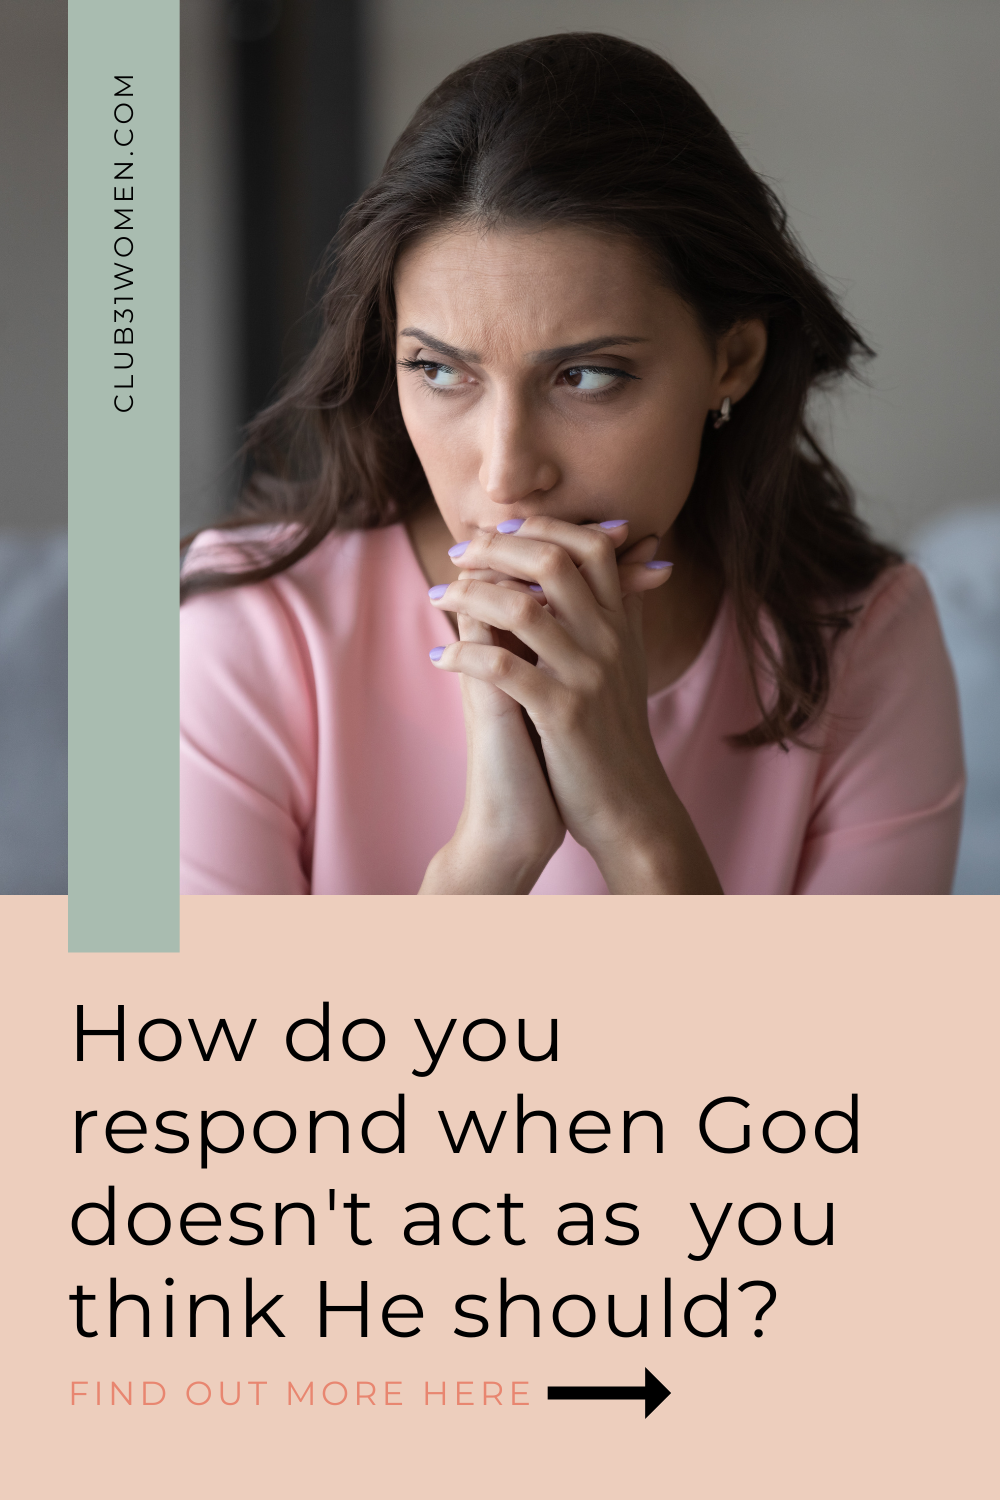 Sometimes God just doesn't act on our situations the way we believe He should. How can we respond when He's disappointed us? via @Club31Women